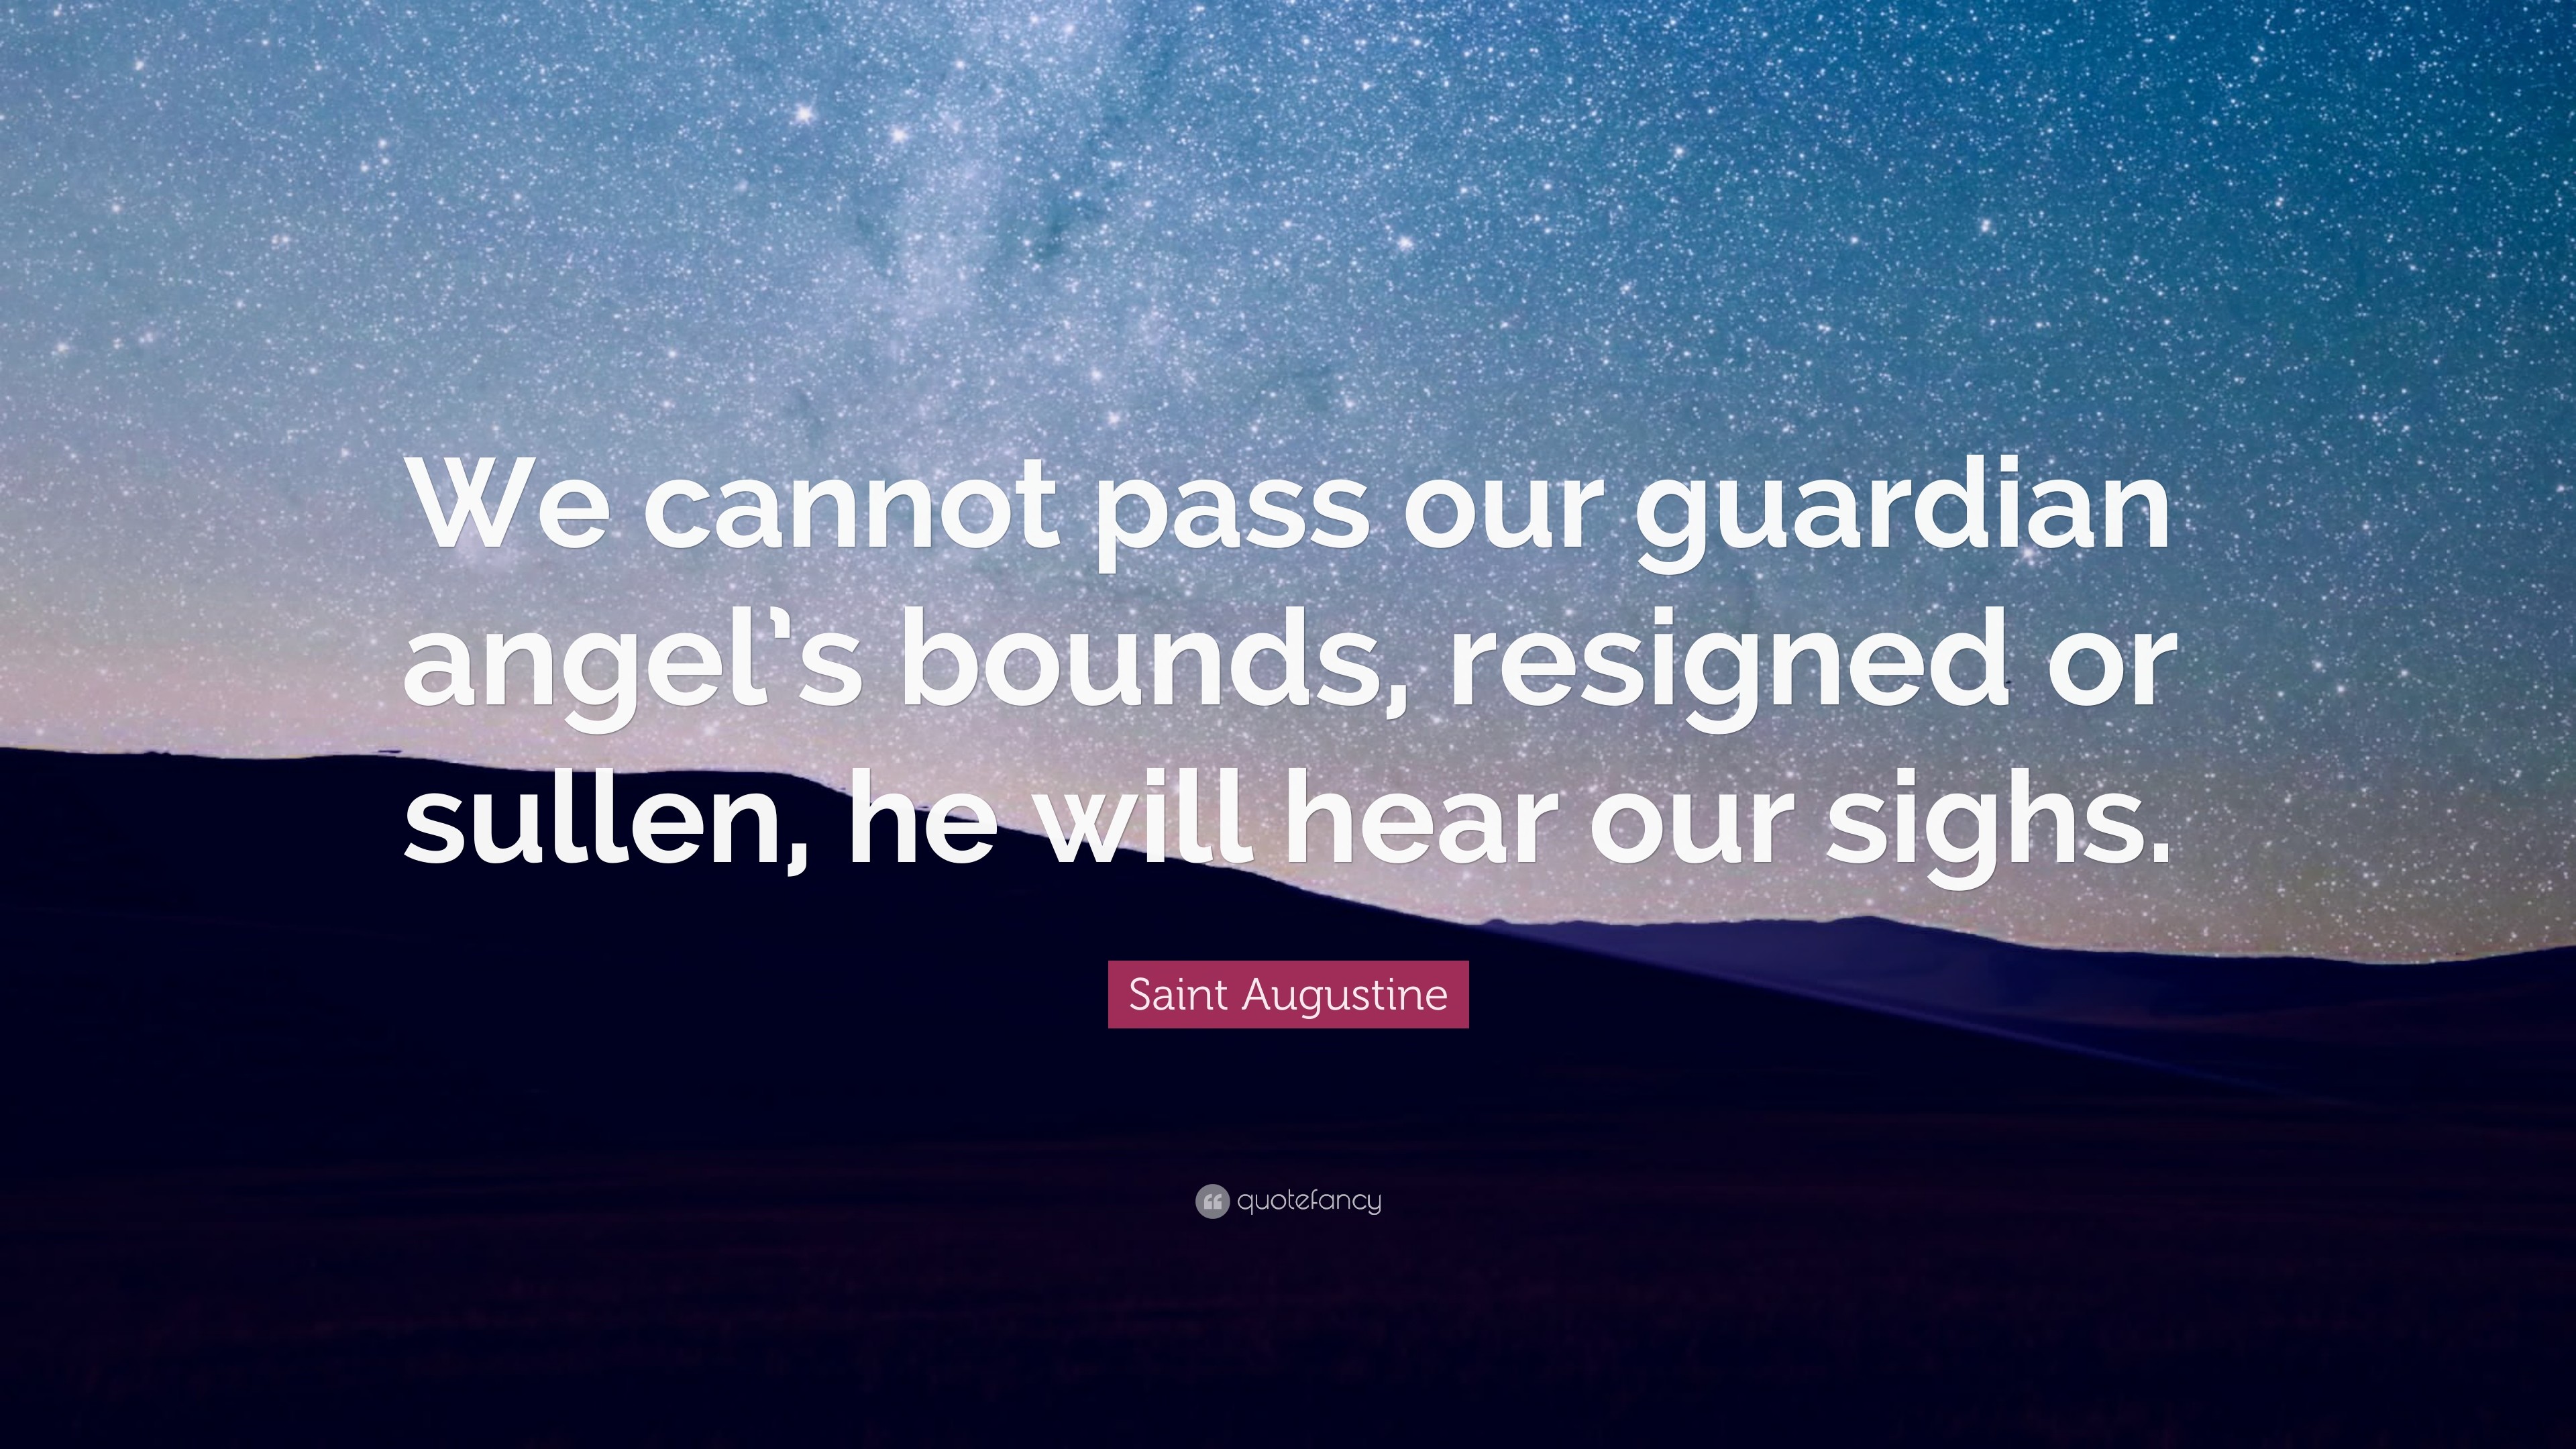 3840x2160 Saint Augustine Quote: “We cannot pass our guardian angel's bounds,  resigned or sullen